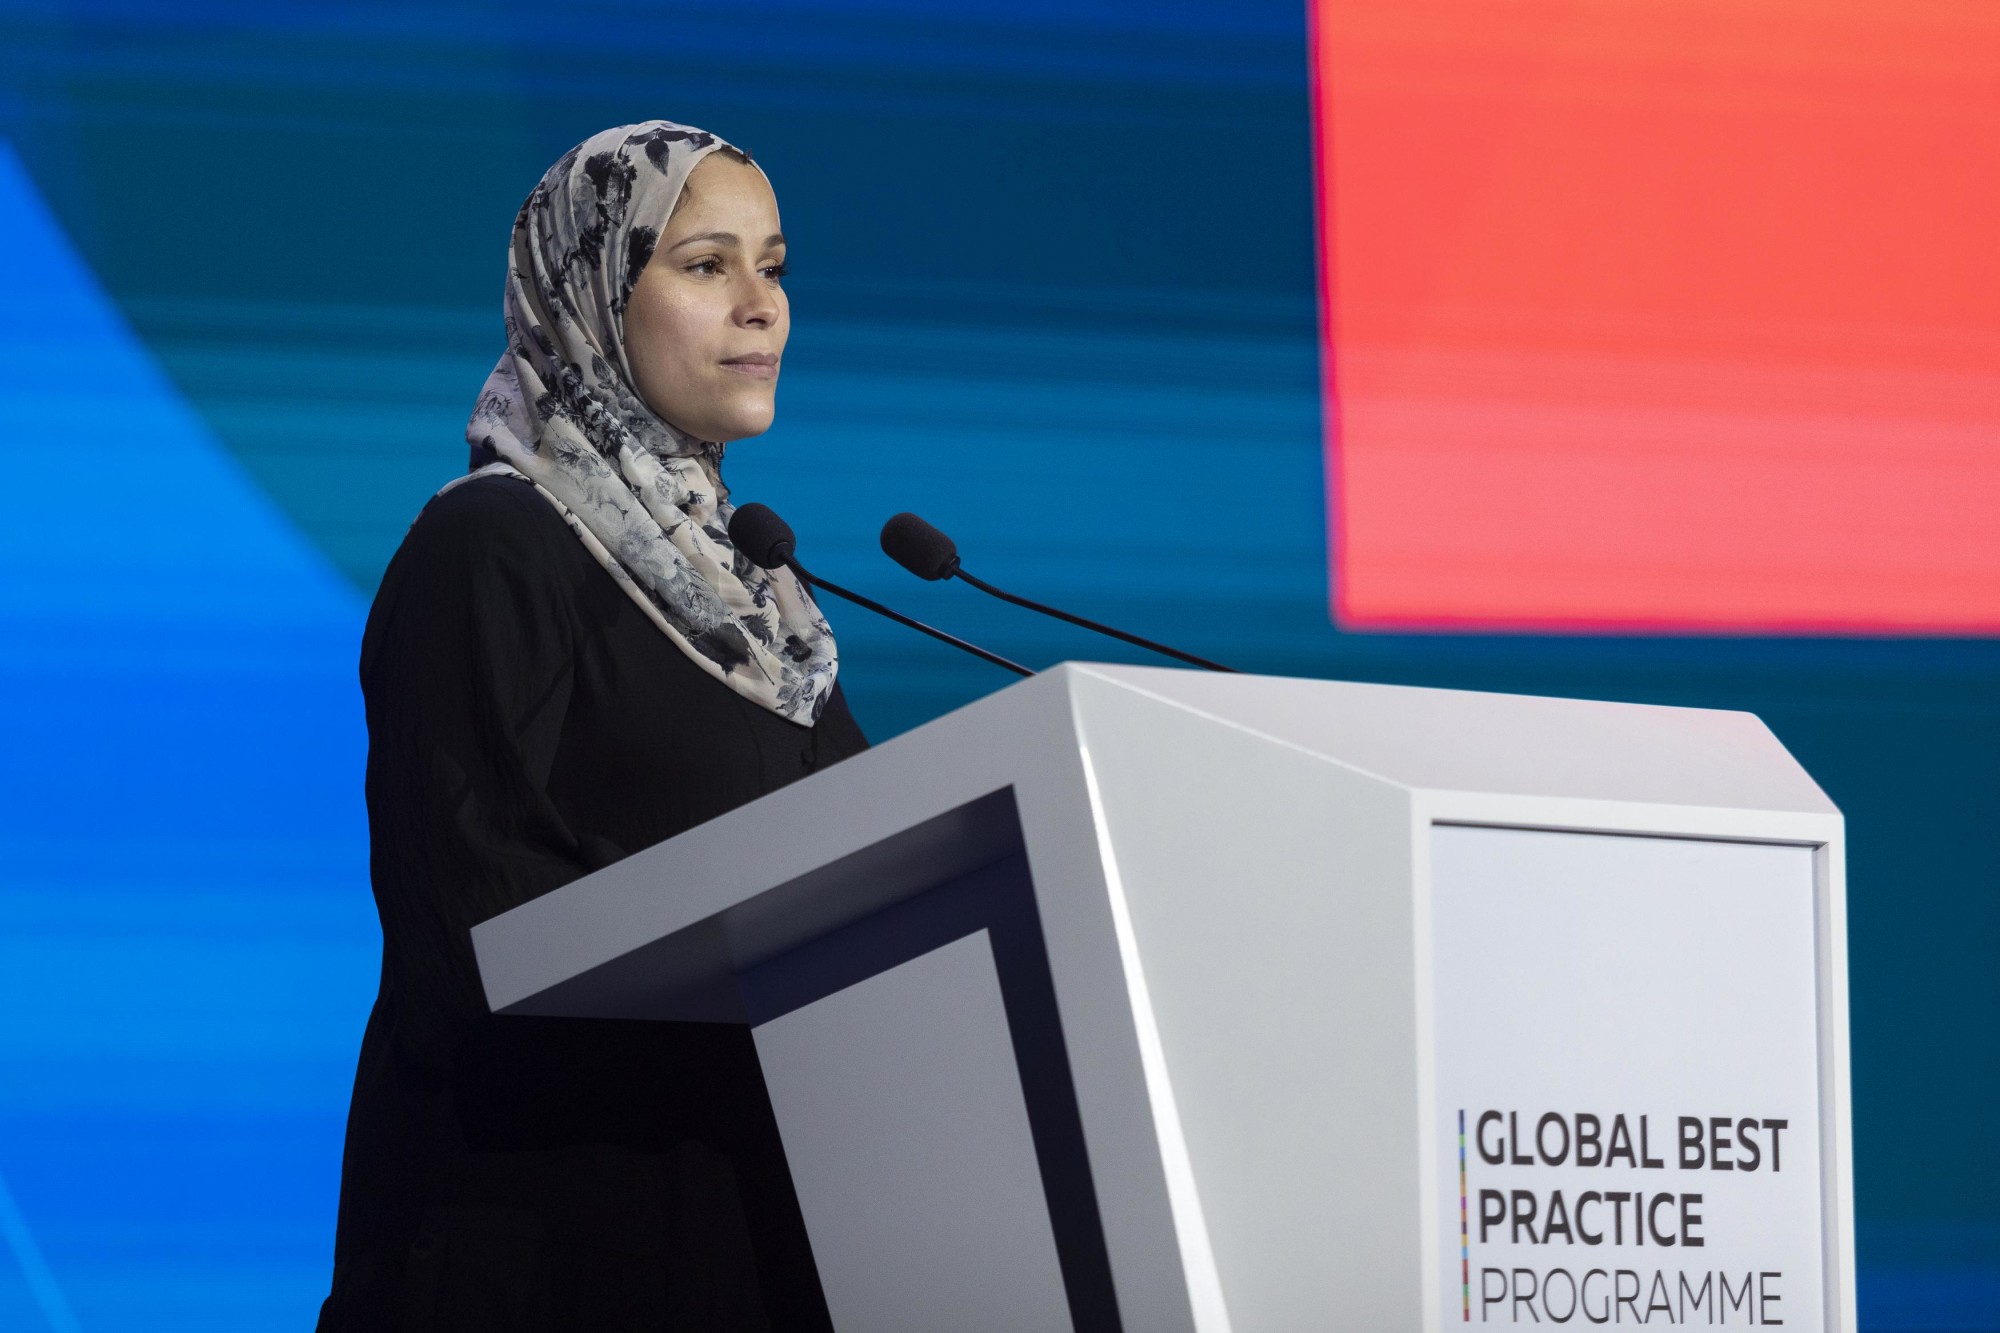 Dr Alaa Murabit, Director, Program Advocacy and Communications Health, Bill & Melinda Gates Foundation speaks during the Global Best Practice Programme Assembly at Dubai Exhibition Centre m35196